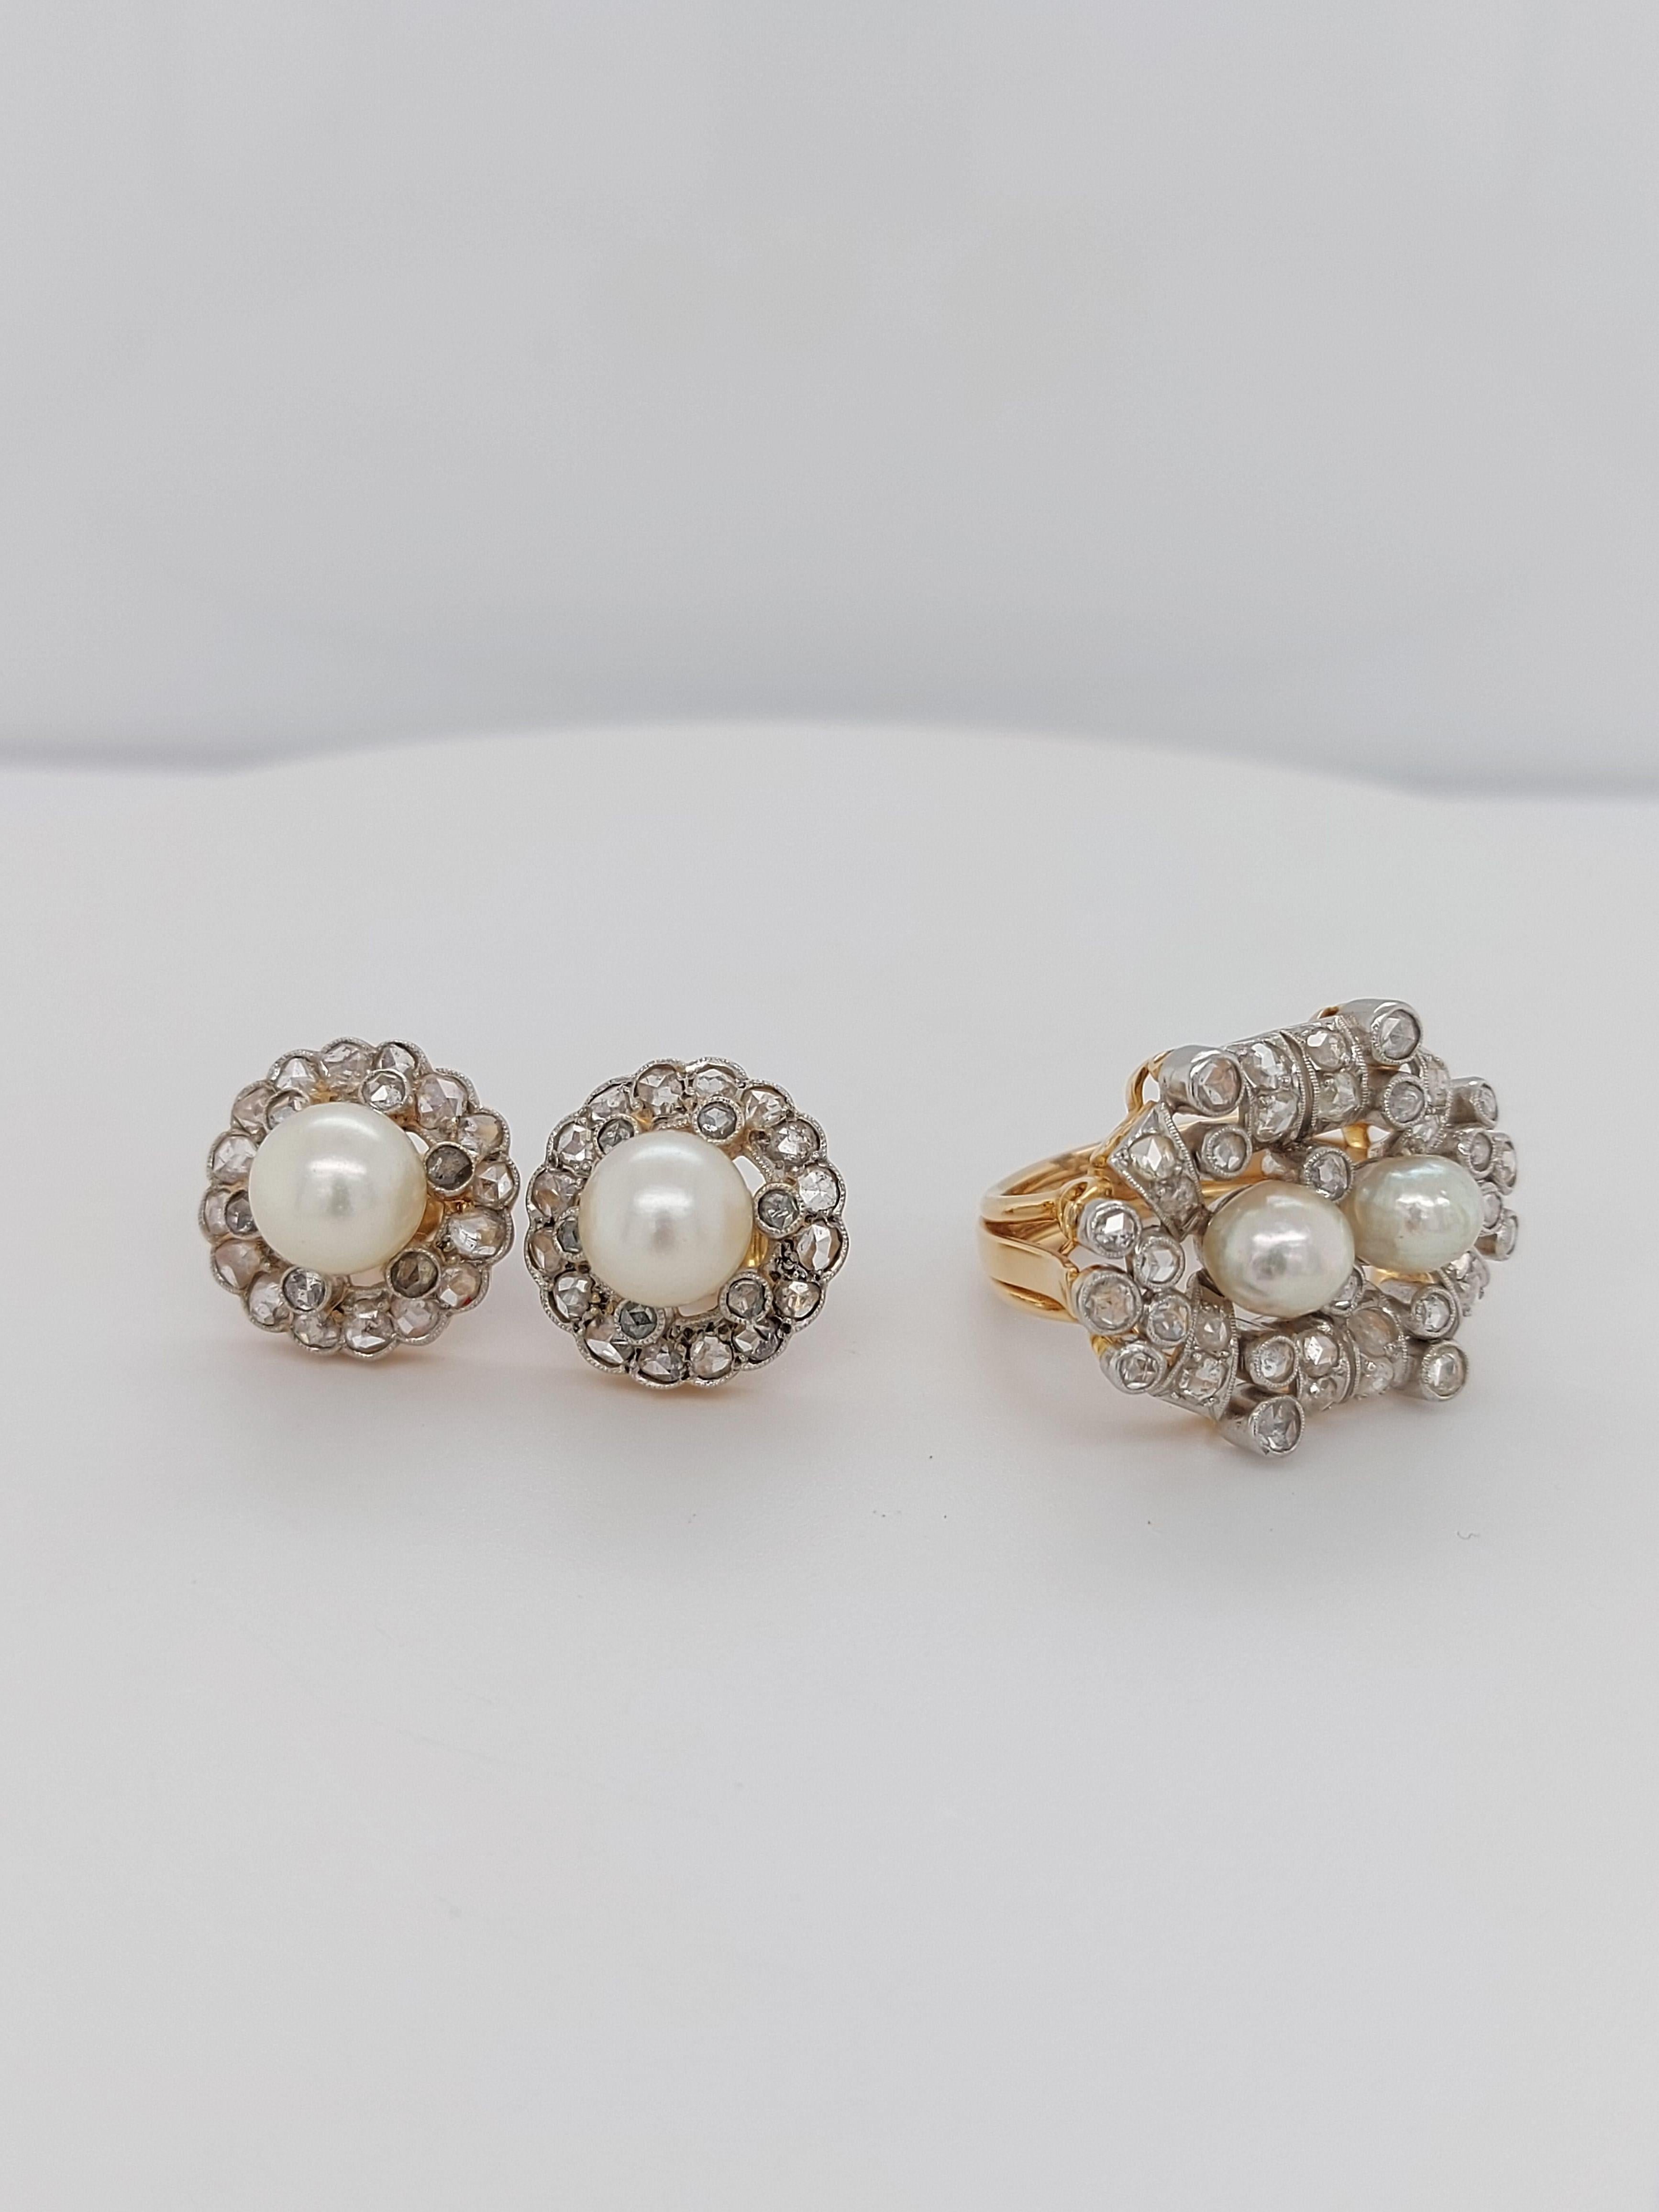 Beautiful Platinum and Gold Ring and Earrings Rose Cut Diamonds and Pearls For Sale 2